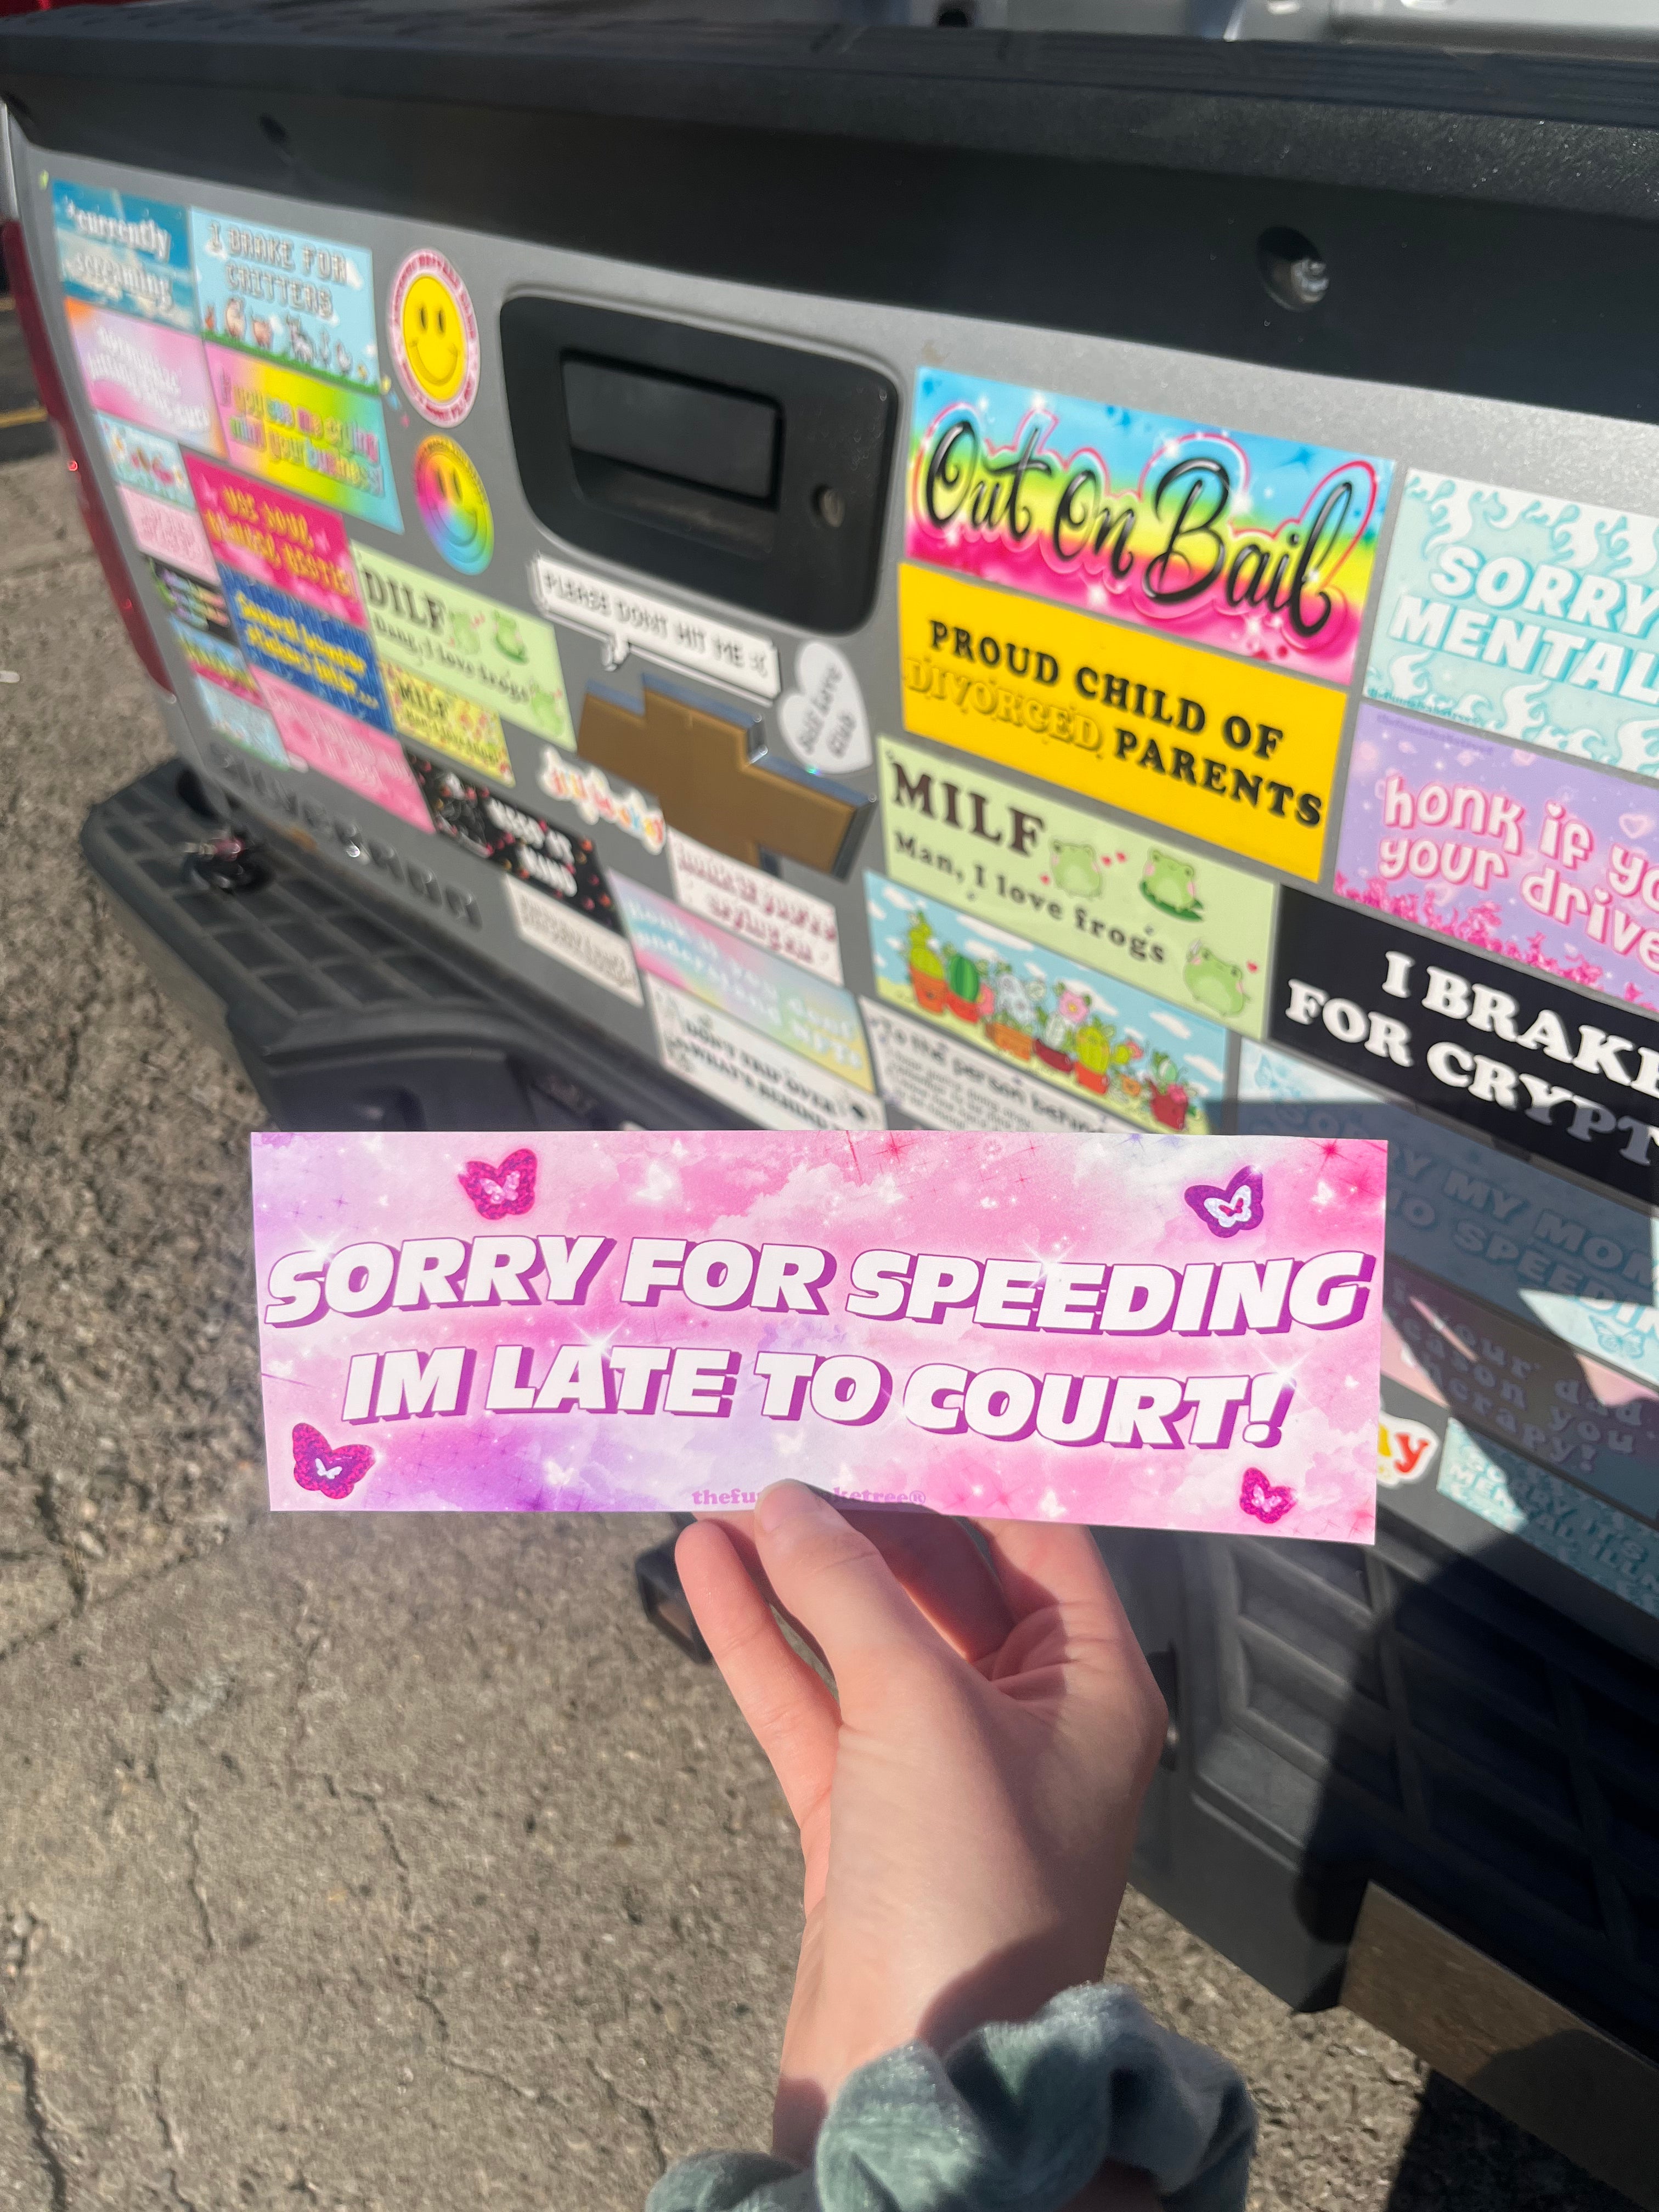 Sorry For Speeding Late To Court Bumper Sticker